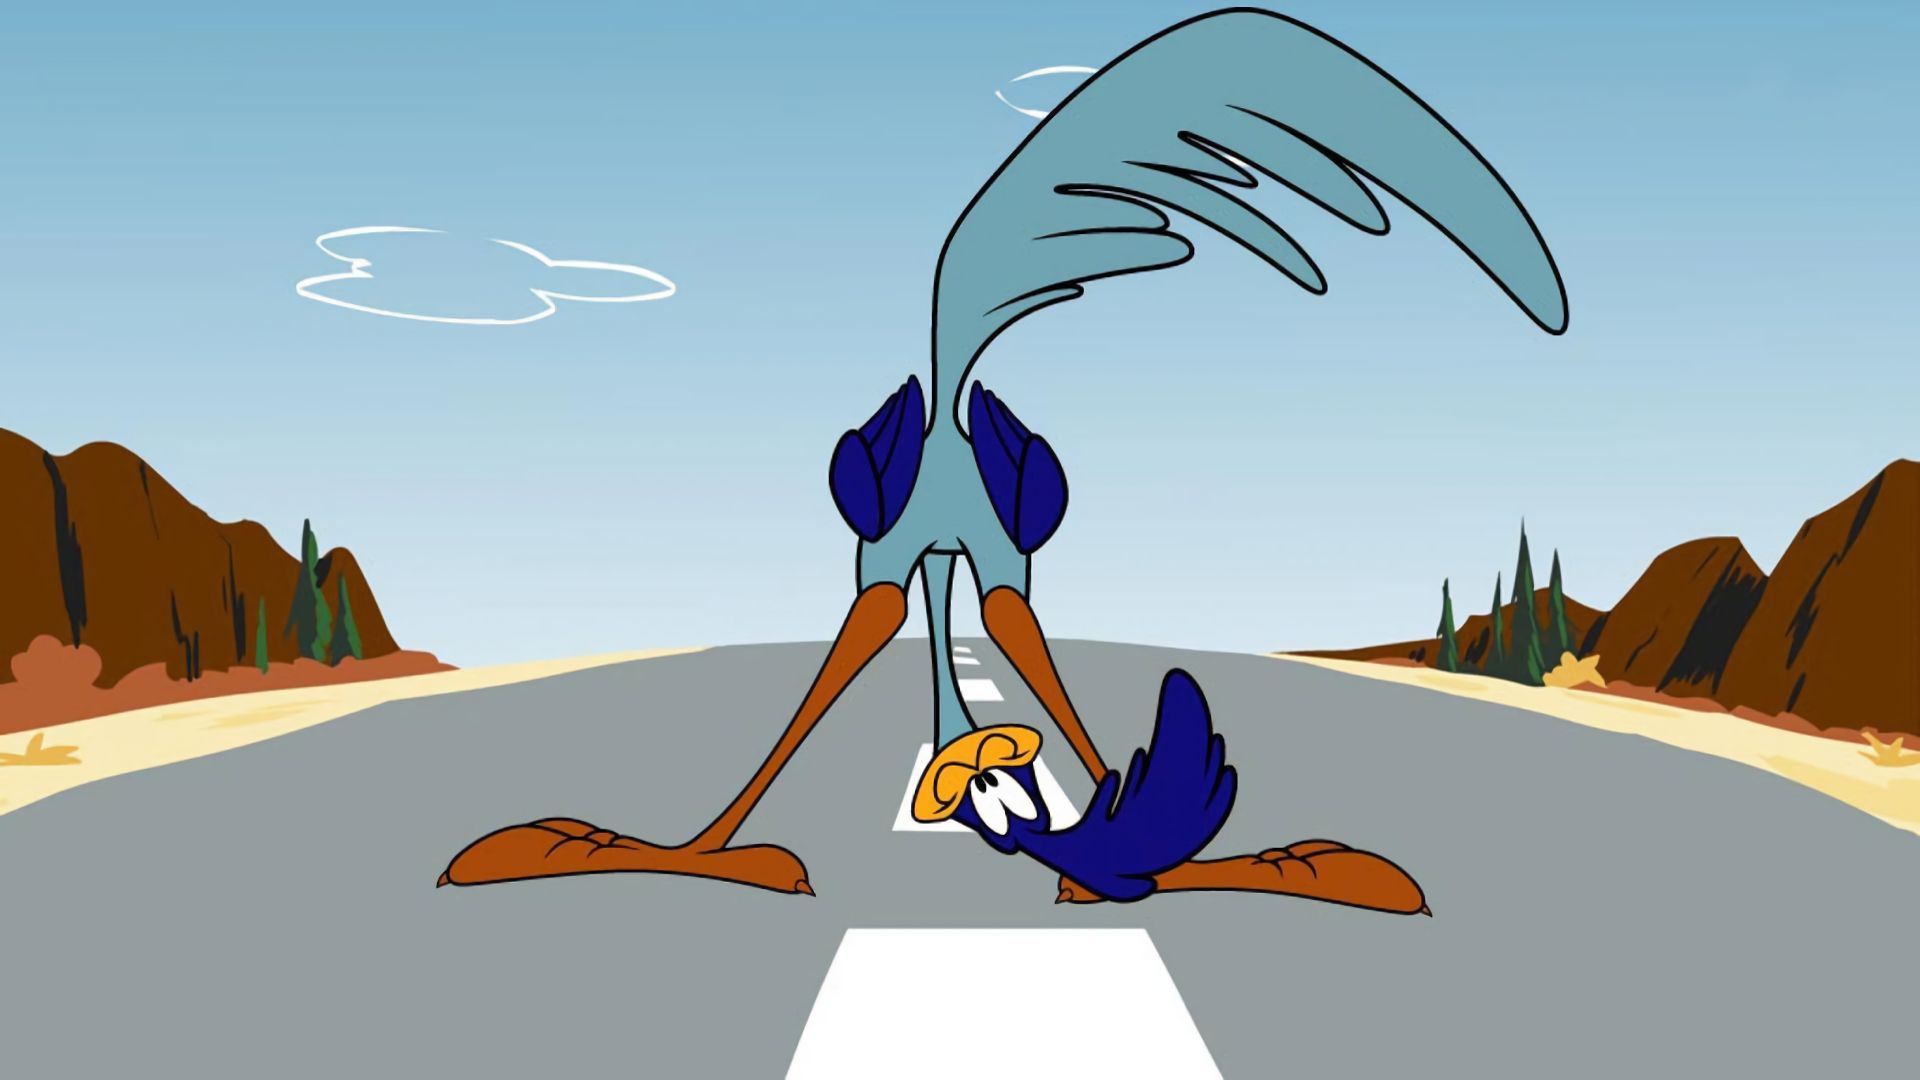 road runner, wile e coyote and the road runner, tv show, looney tunes